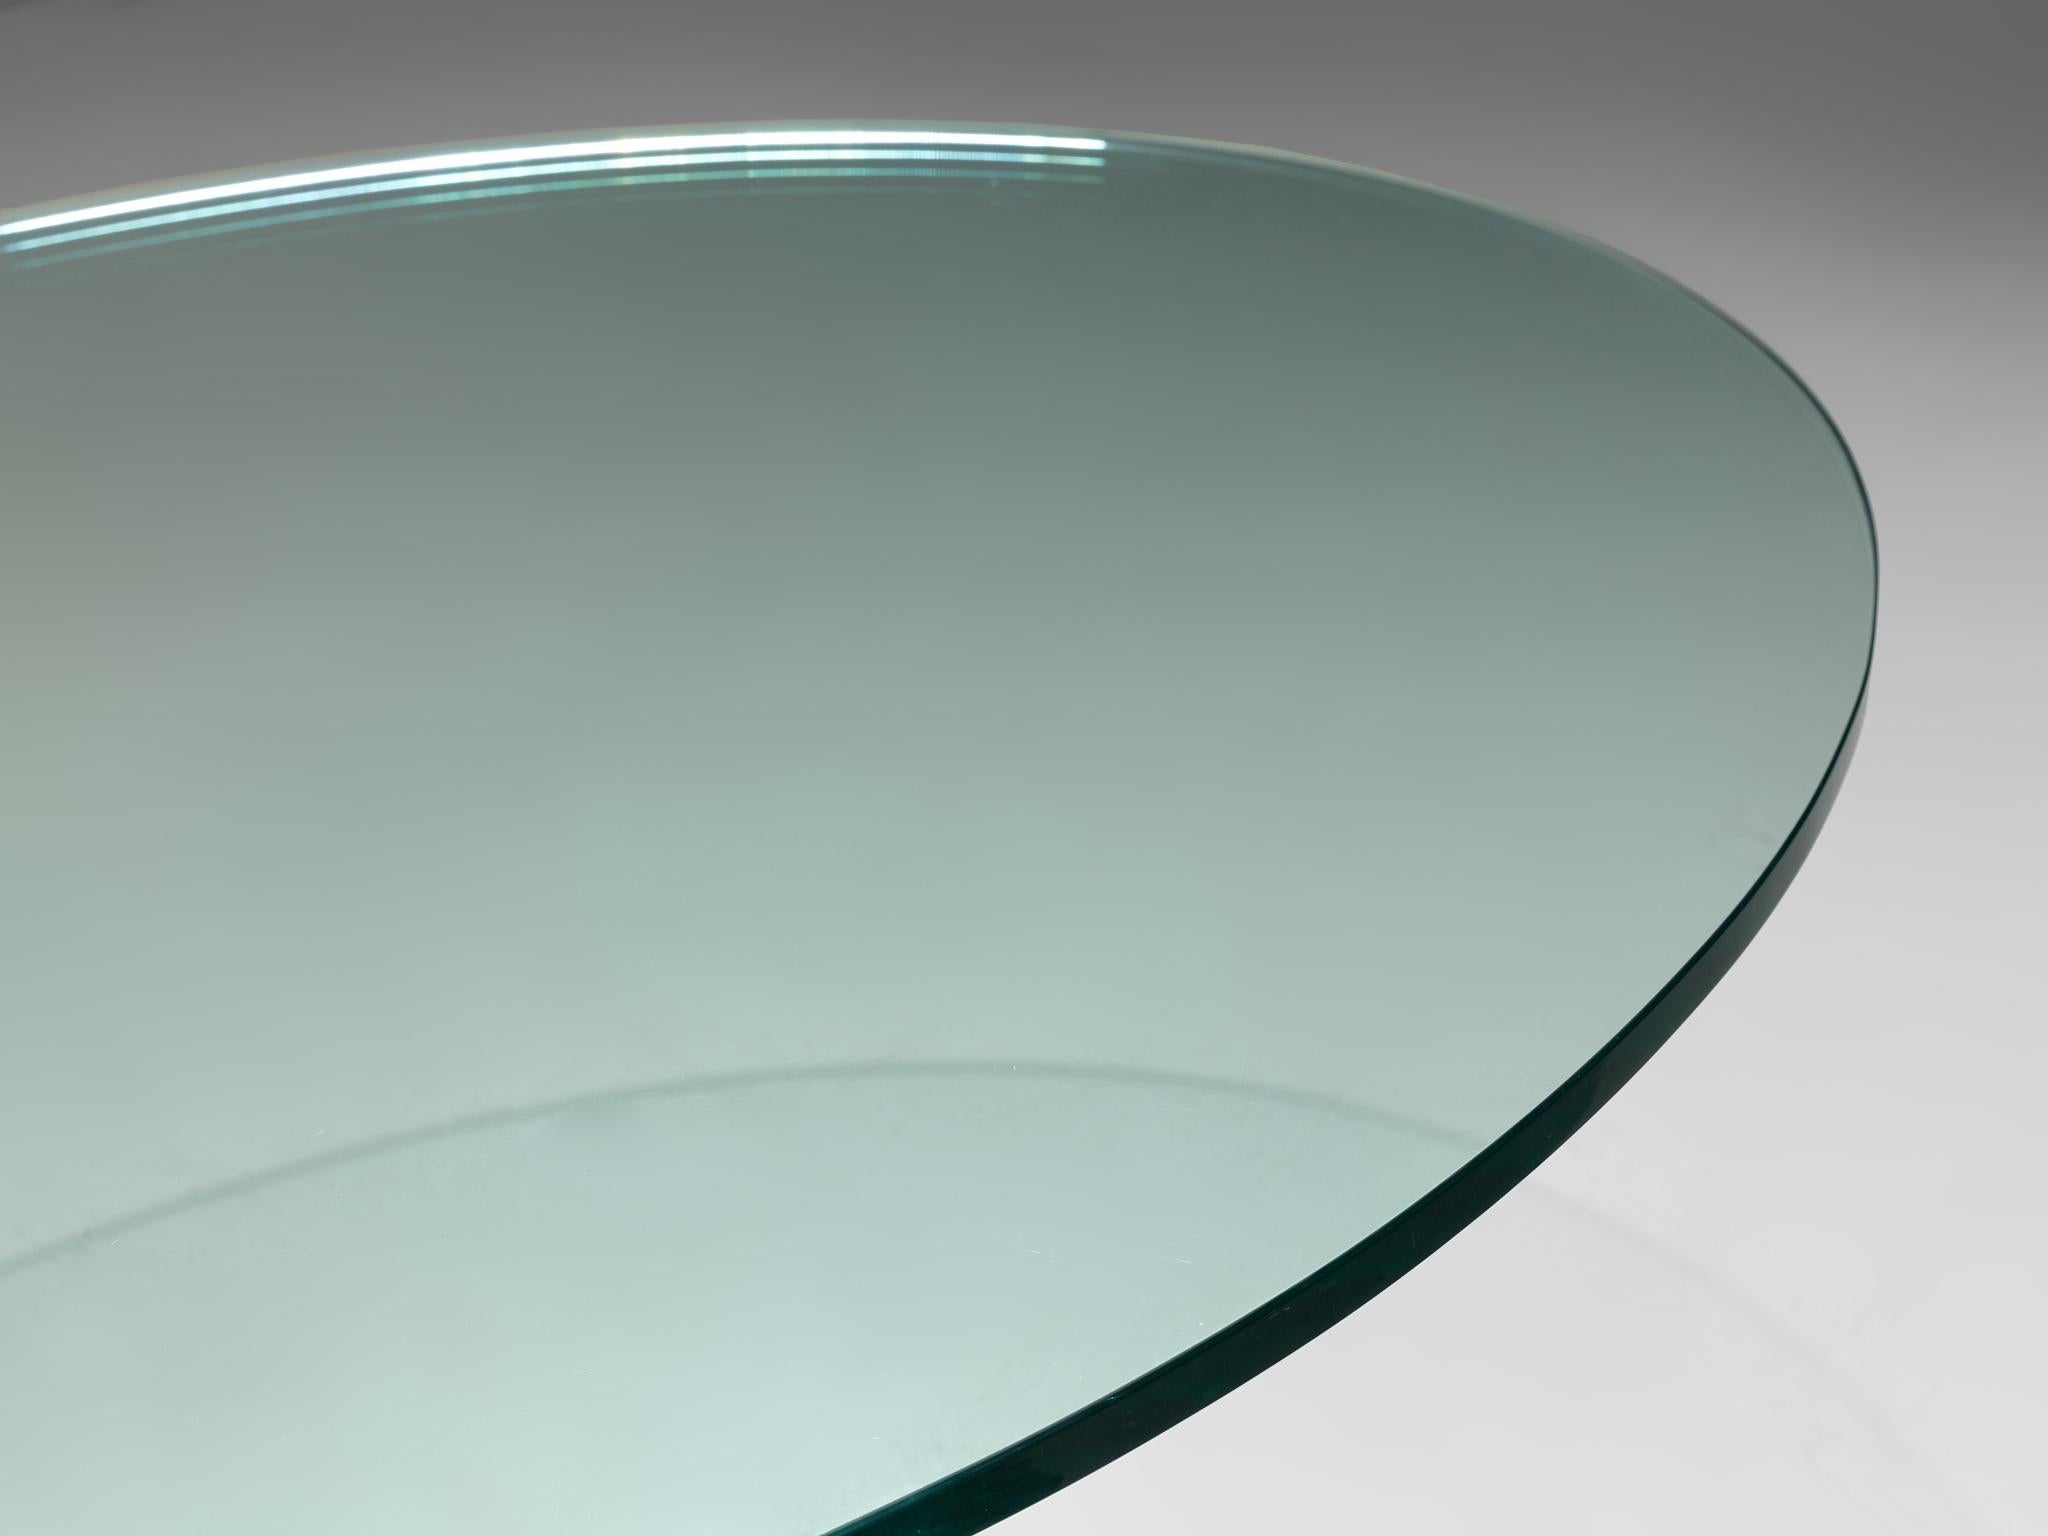 Ronald Schmitt Coffee Table in Carrara Marble and Glass